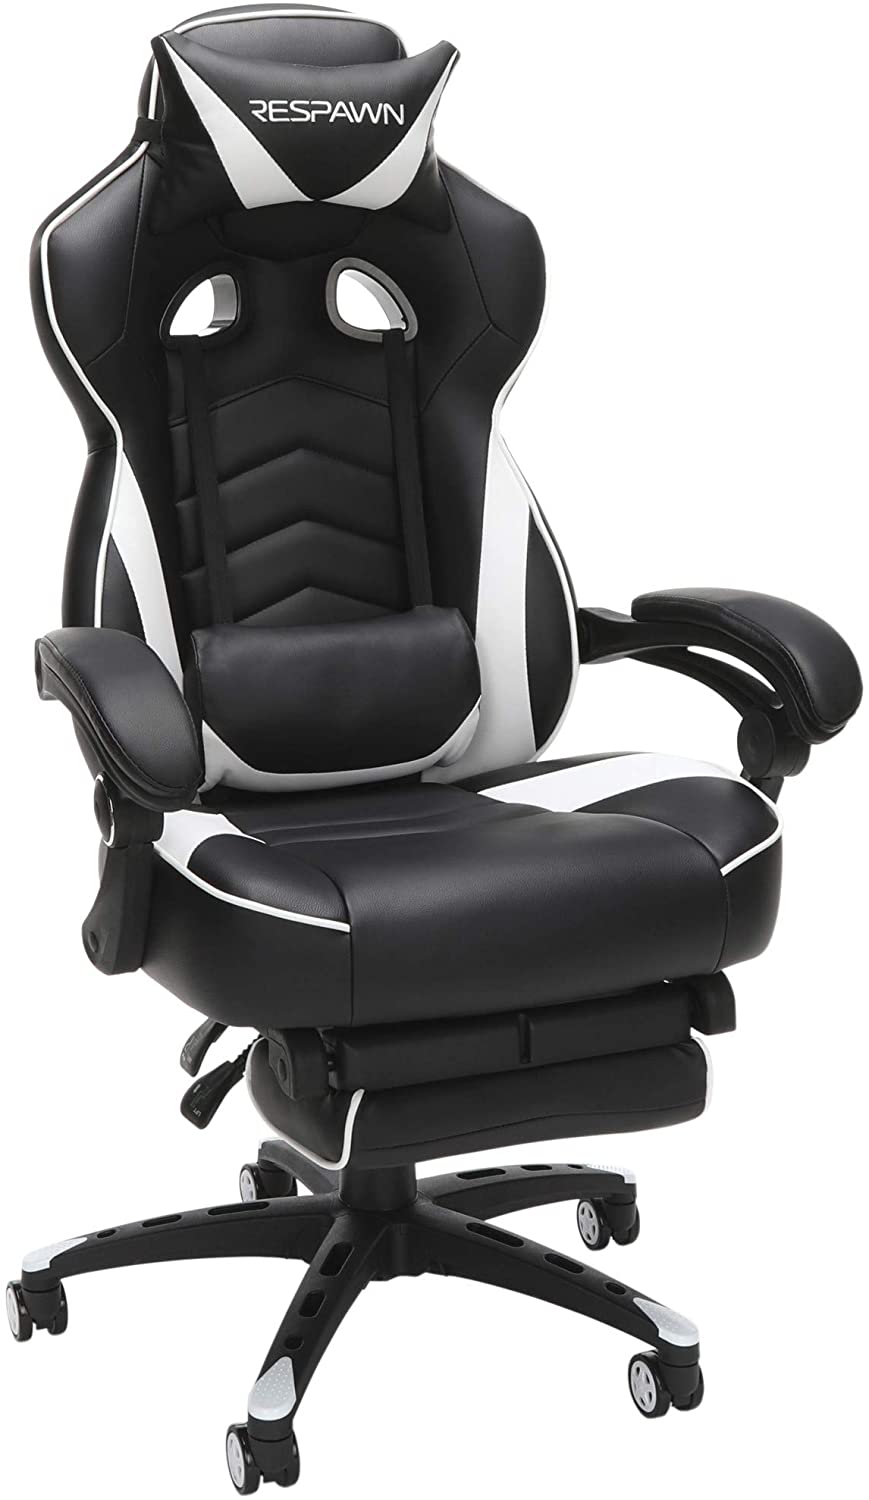 RESPAWN 110 Racing Style Gaming Chair 